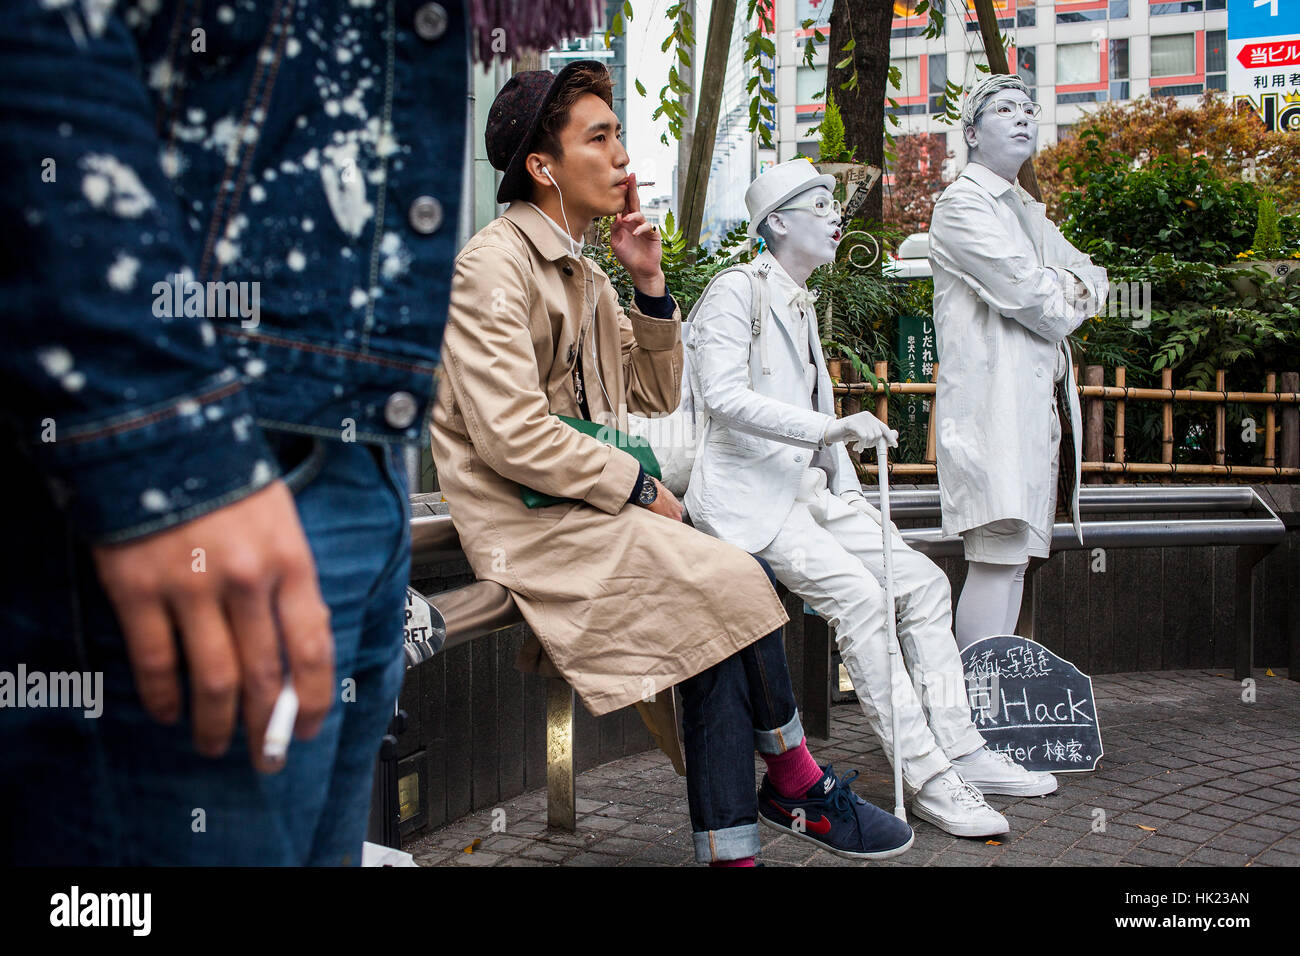 Street artist, and young people, Hachiko square,Shibuya, Tokyo, Japan. Stock Photo